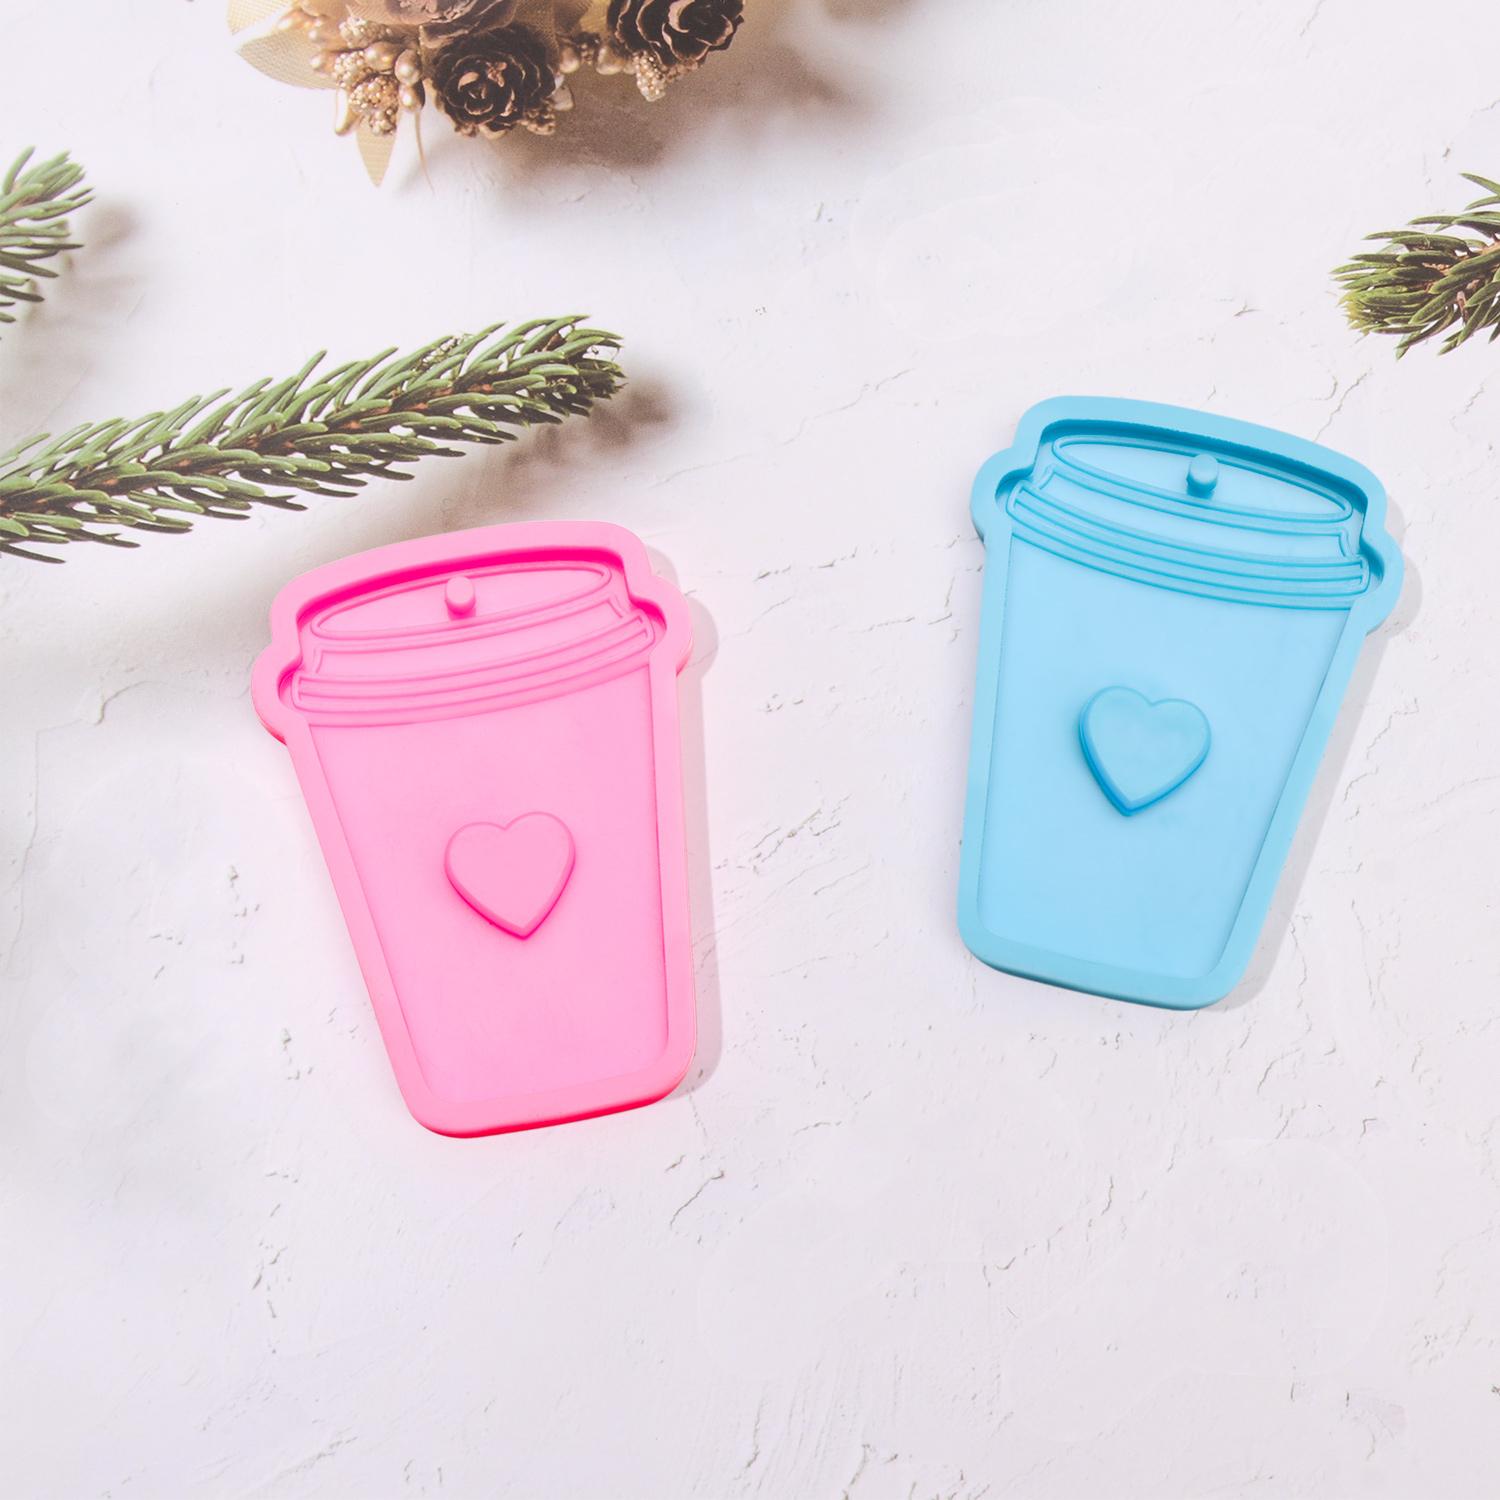 HIYRCH STORE Household Pendant Heart Coffee Cup Mold Resin Craft for DIY Jewelry Silicone Cup Key Chain Mold Resin Ring Mould Coffee Cup Resin Mold